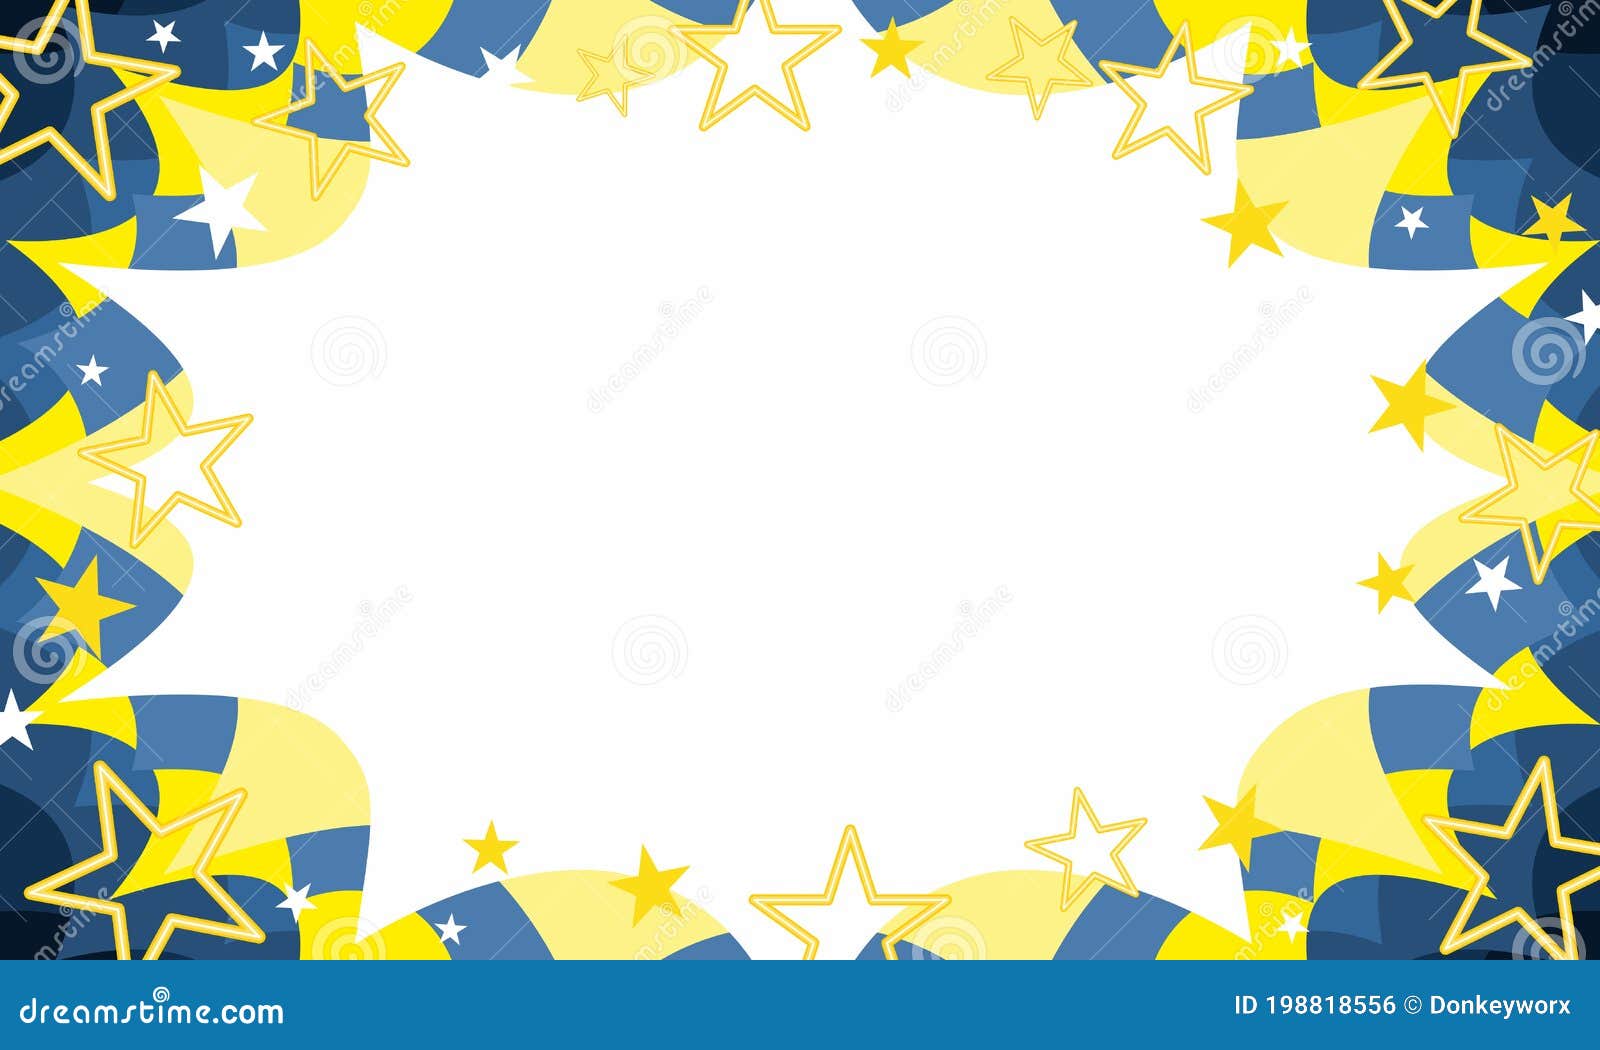 christmas celebration sale event invitation starburst background in swedish blue and gold with stars